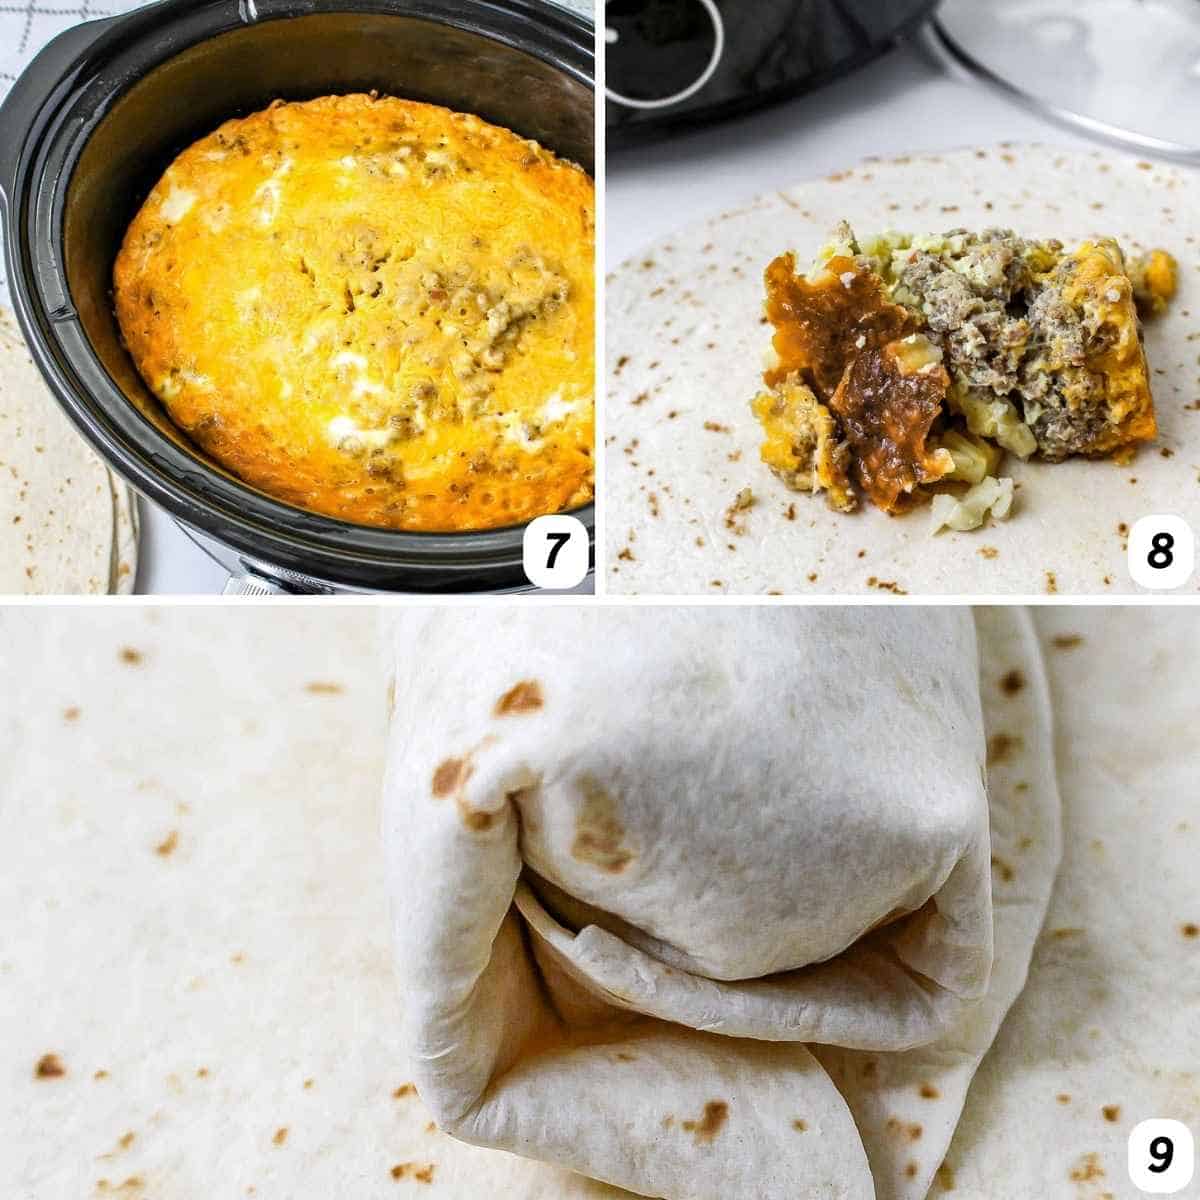 Three panel grid of process shots 7-9 - cook ingredients in crock pot, portion out onto tortillas, and wrap burritos.